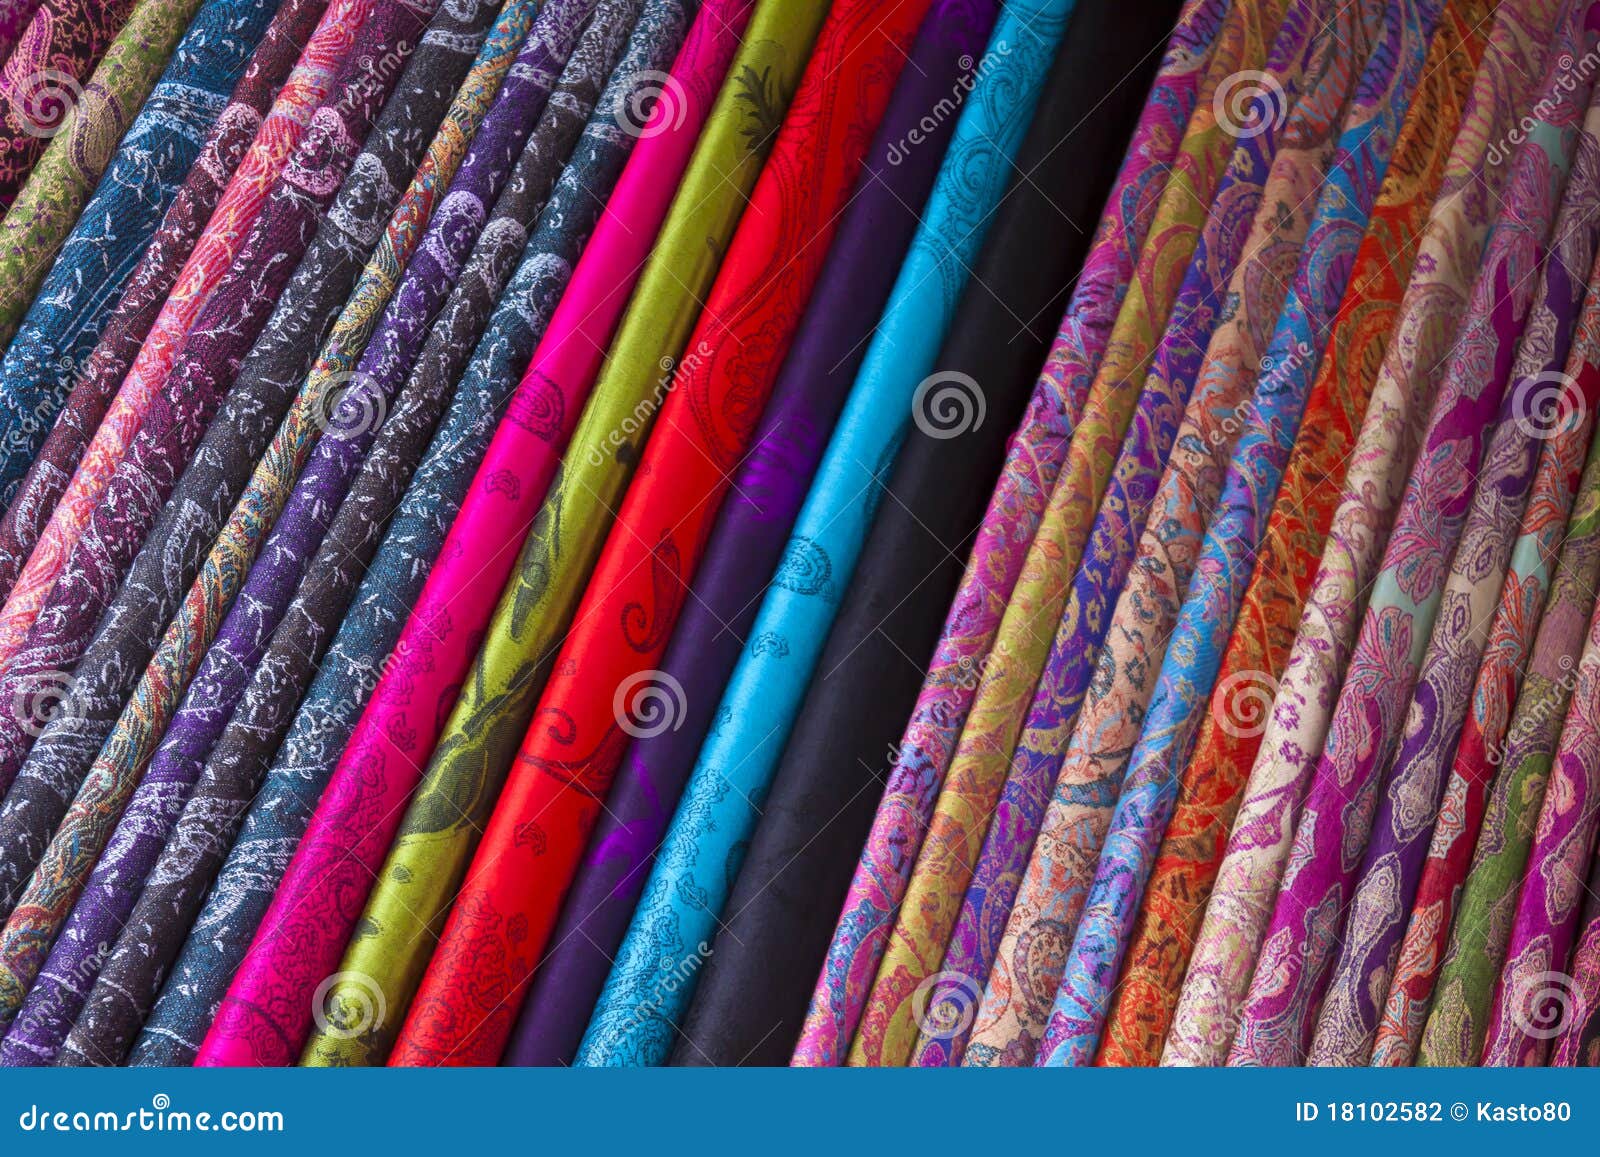 Morocco crafts stock photo. Image of abstract, handcraft - 18102582